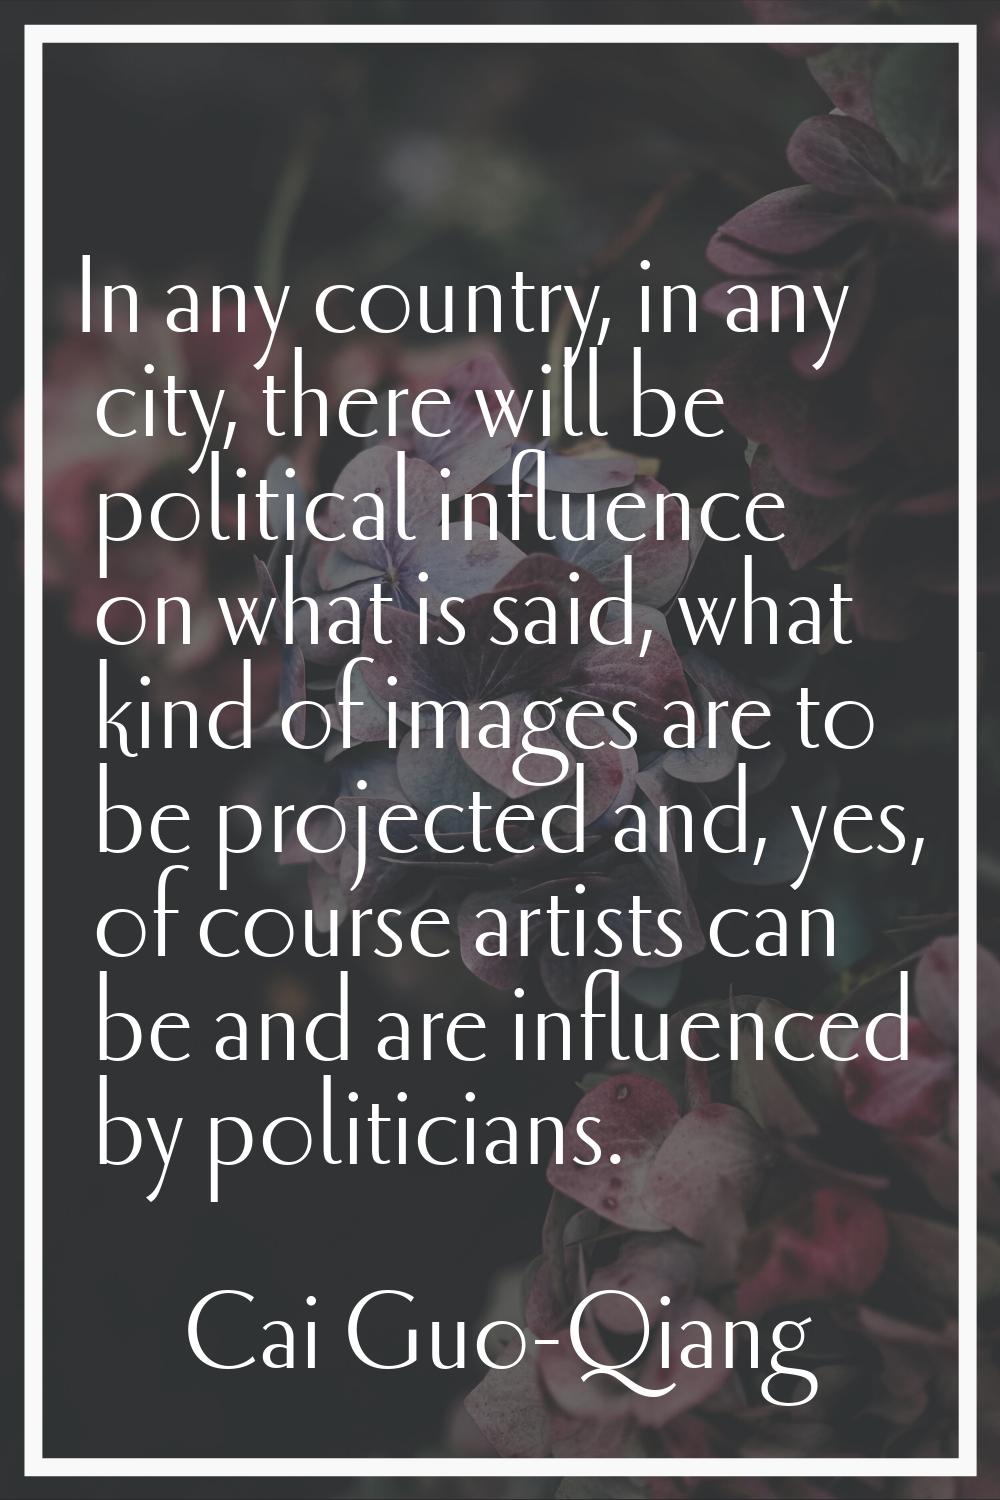 In any country, in any city, there will be political influence on what is said, what kind of images